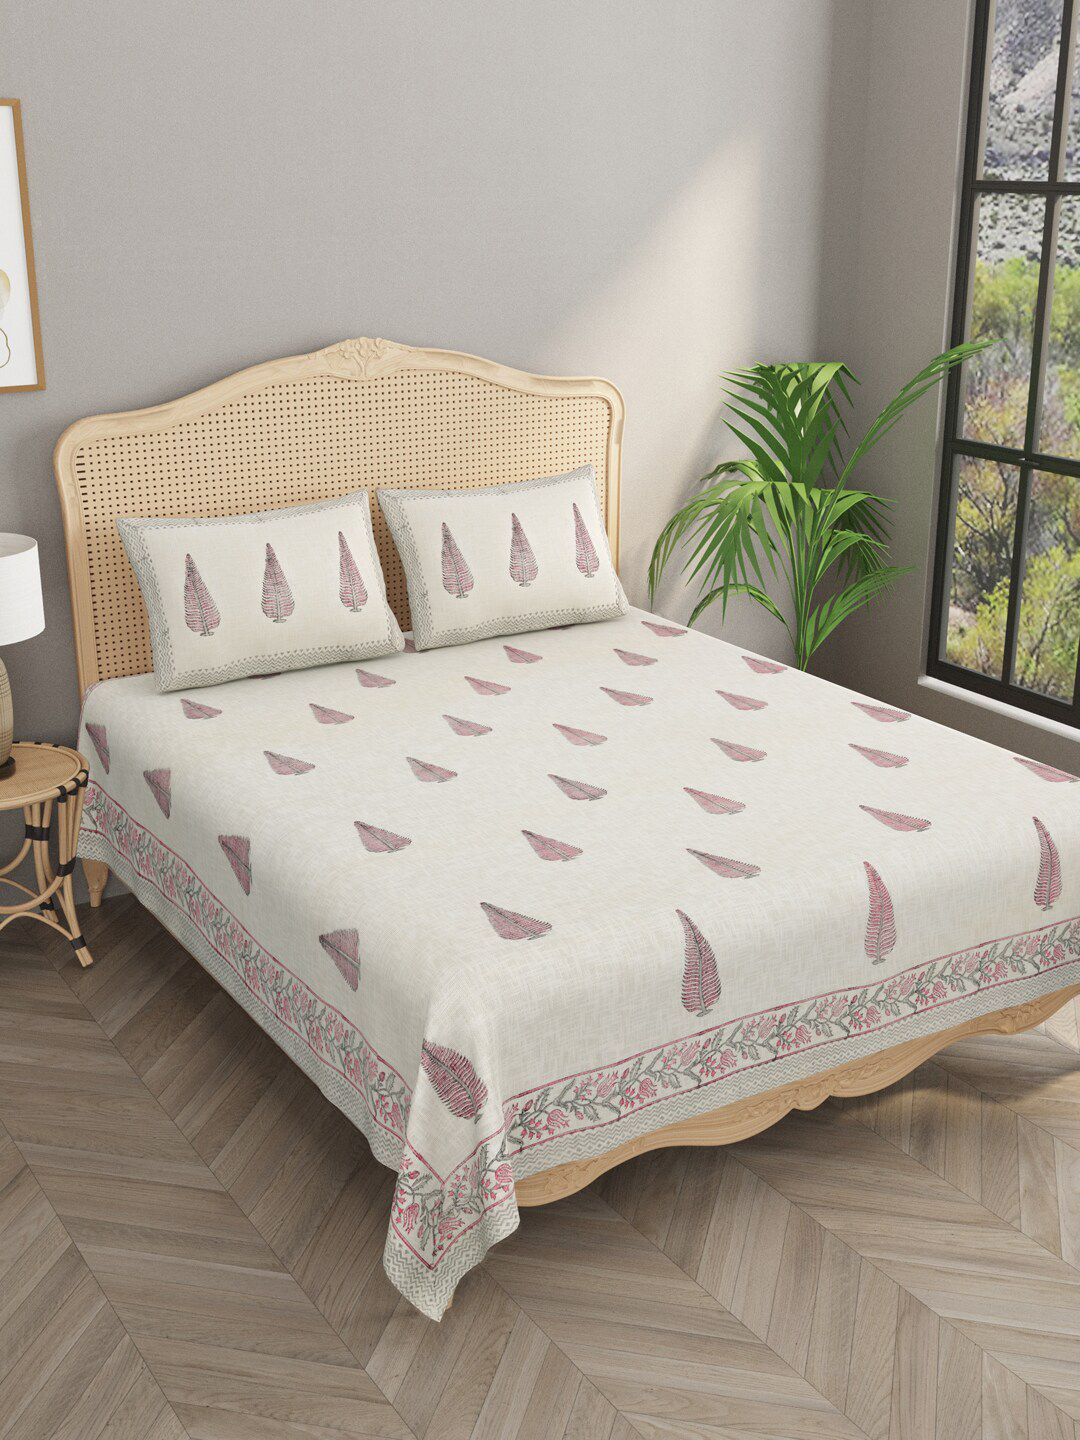 Gulaab Jaipur King Floral Printed 380 TC Cotton Bed Sheet with Pillow Covers Price in India